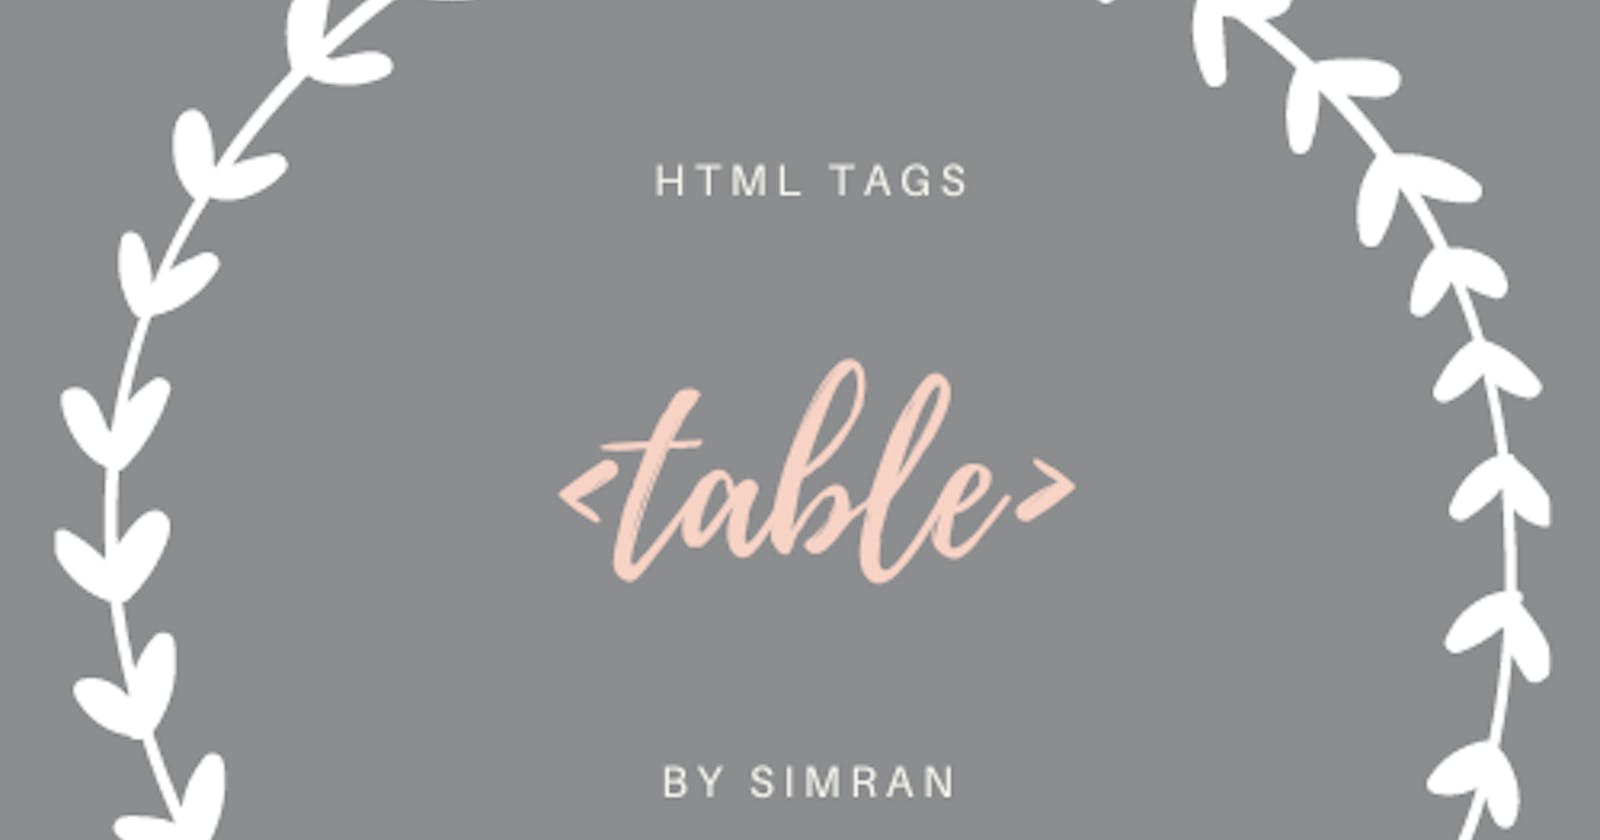 Let's Play with <Table>